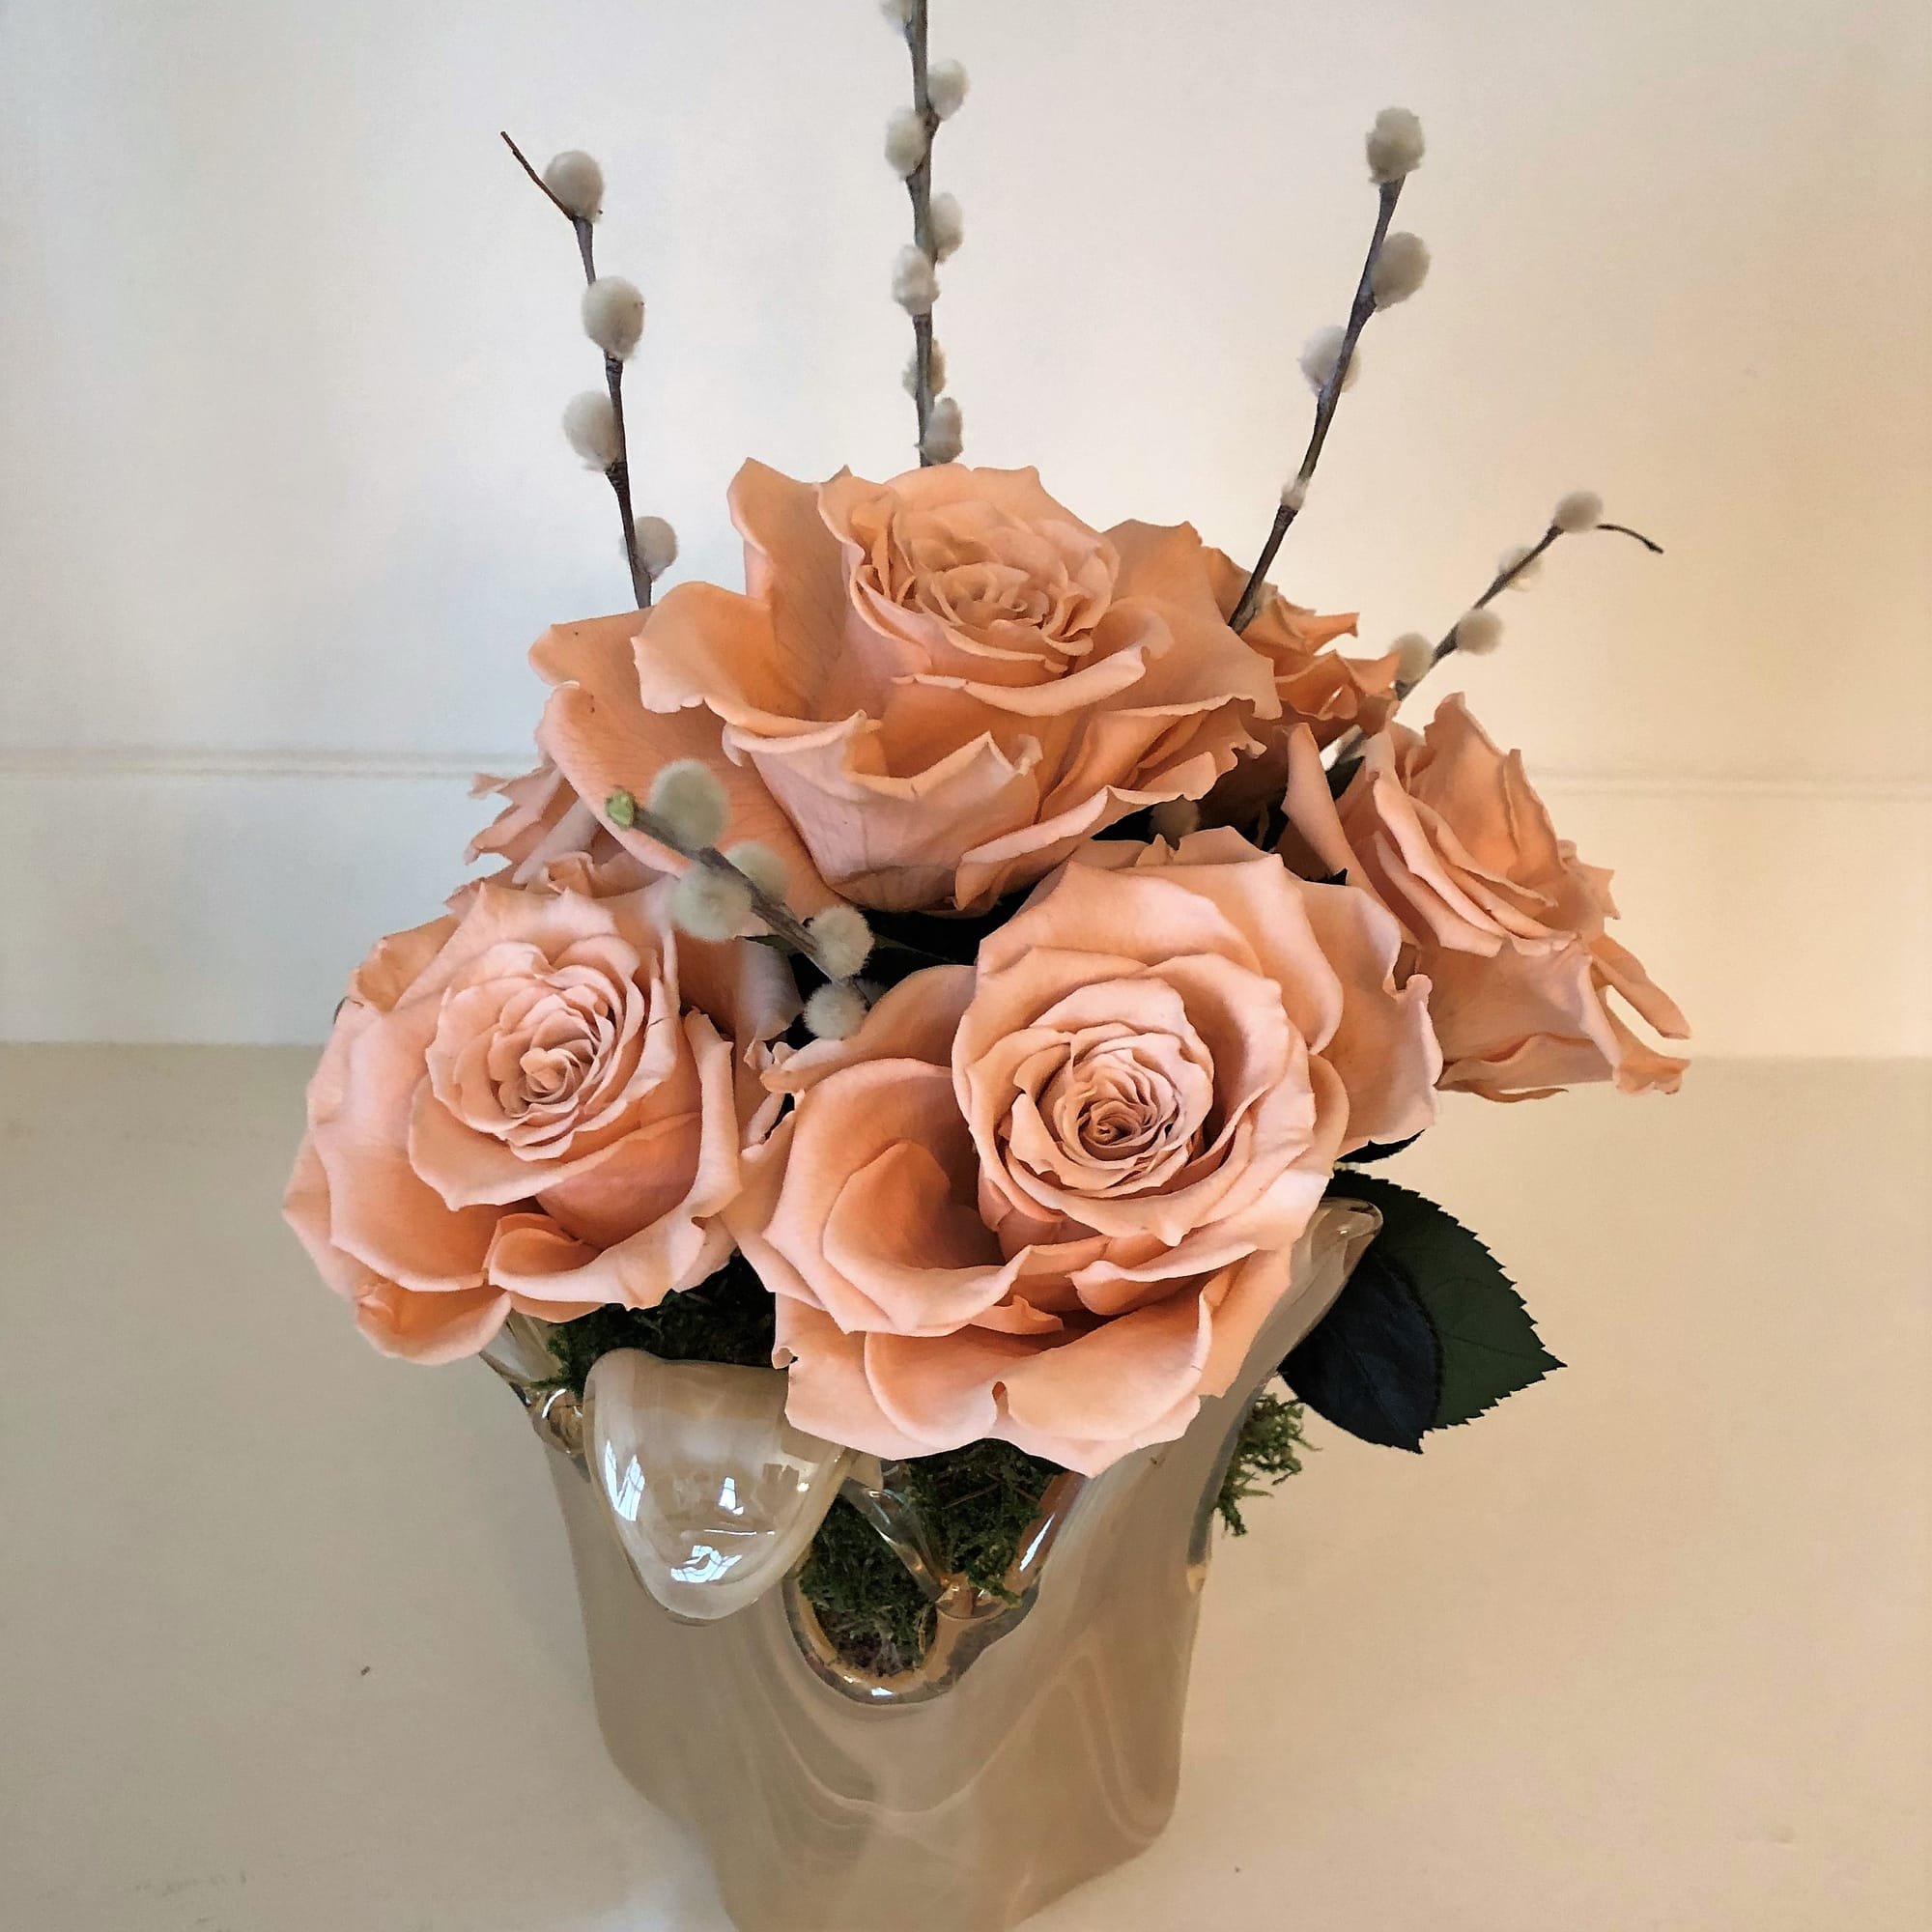 123 Murano Glass with Peach Roses